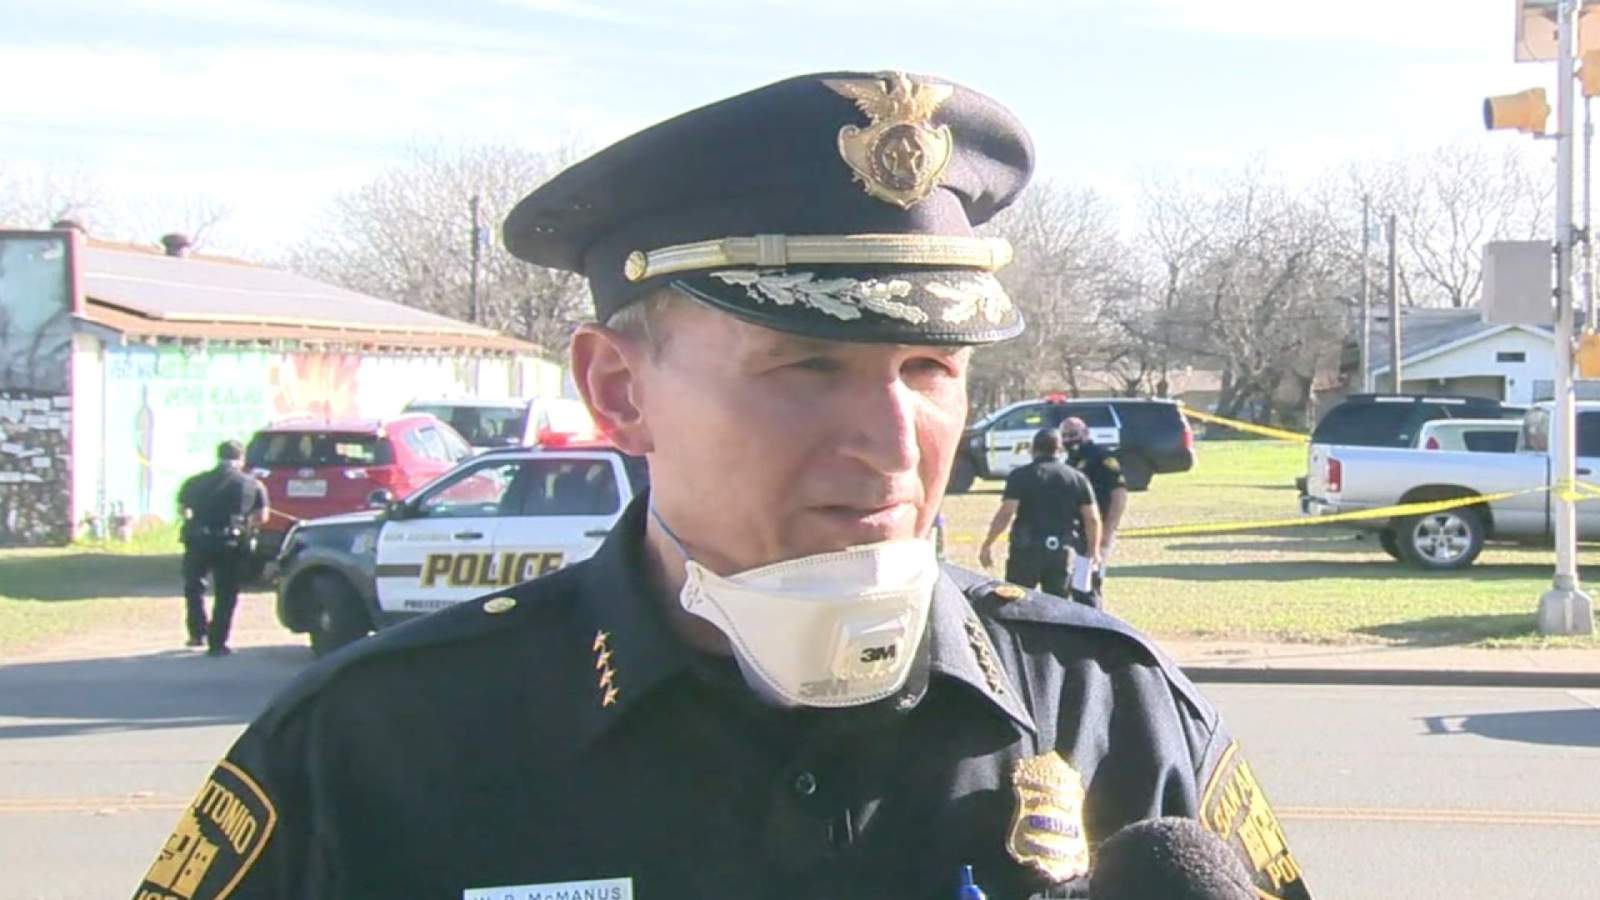 Chief McManus says about the shooting at a church event that the young boy, the man, was injured